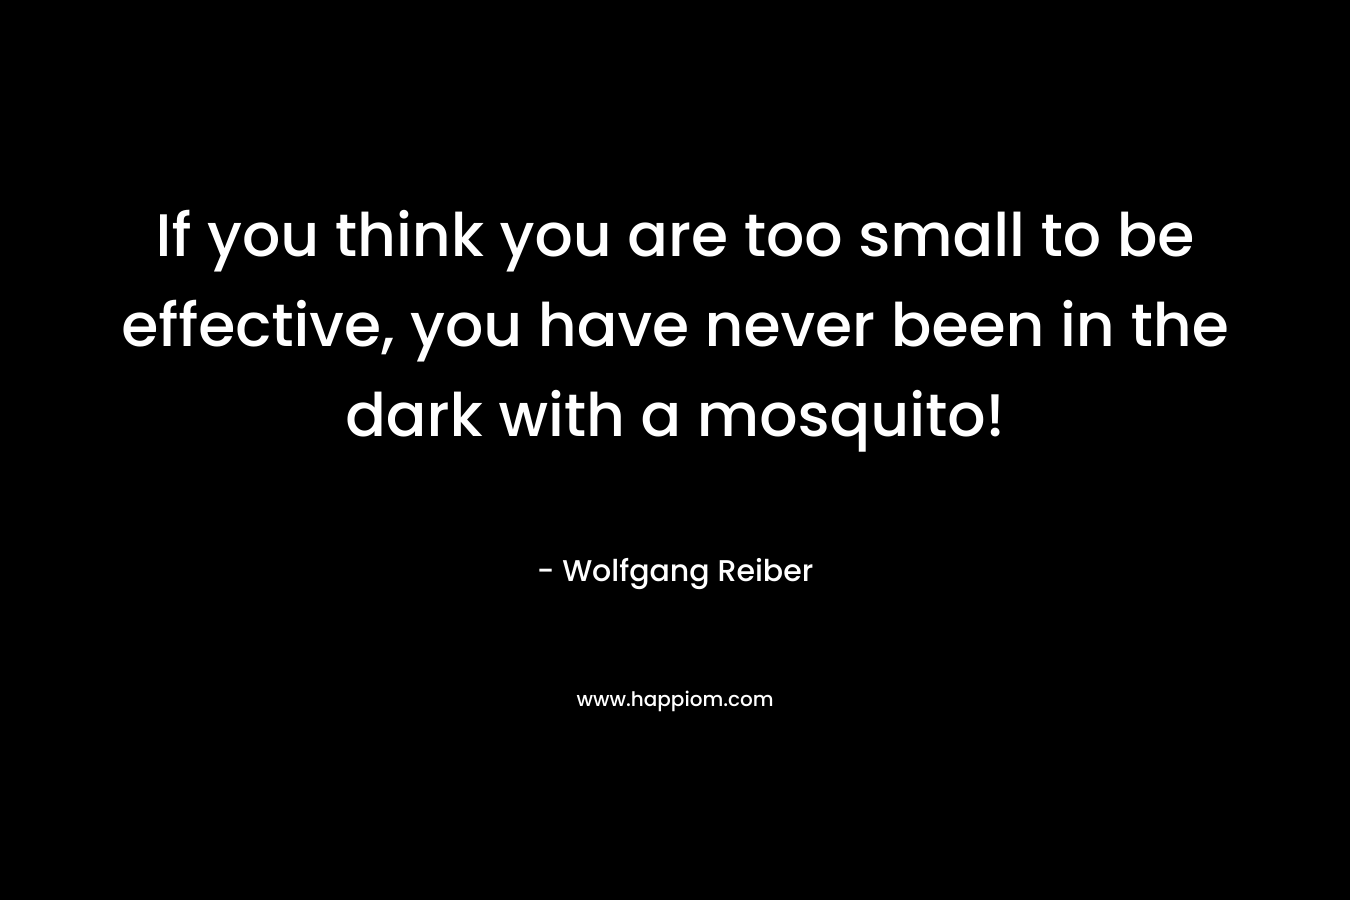 If you think you are too small to be effective, you have never been in the dark with a mosquito! – Wolfgang Reiber